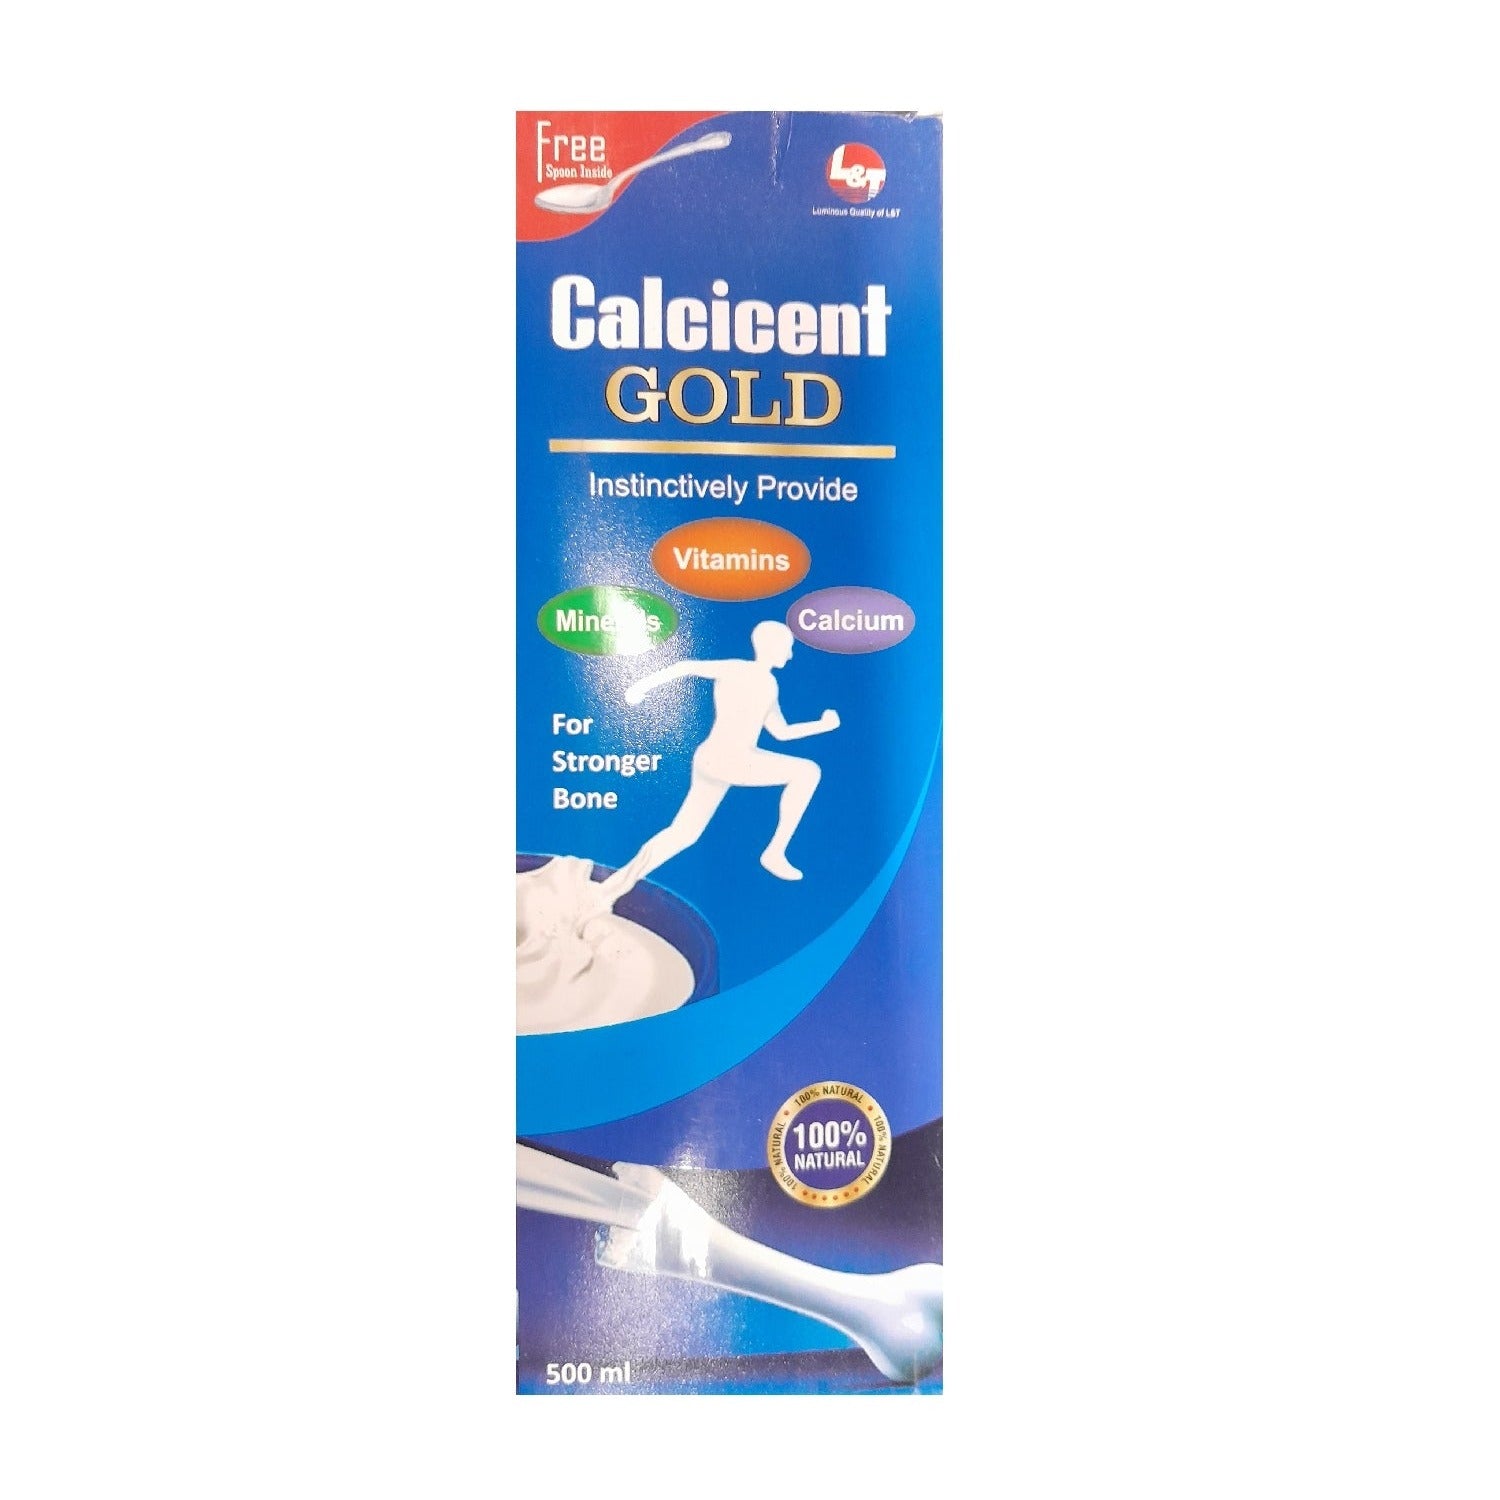 L & T Healthcare Ayurvedic Calcicent Gold Instinctively Provide For Strong Bone Vitamin,Minerals & Calcium Syrup 500ml